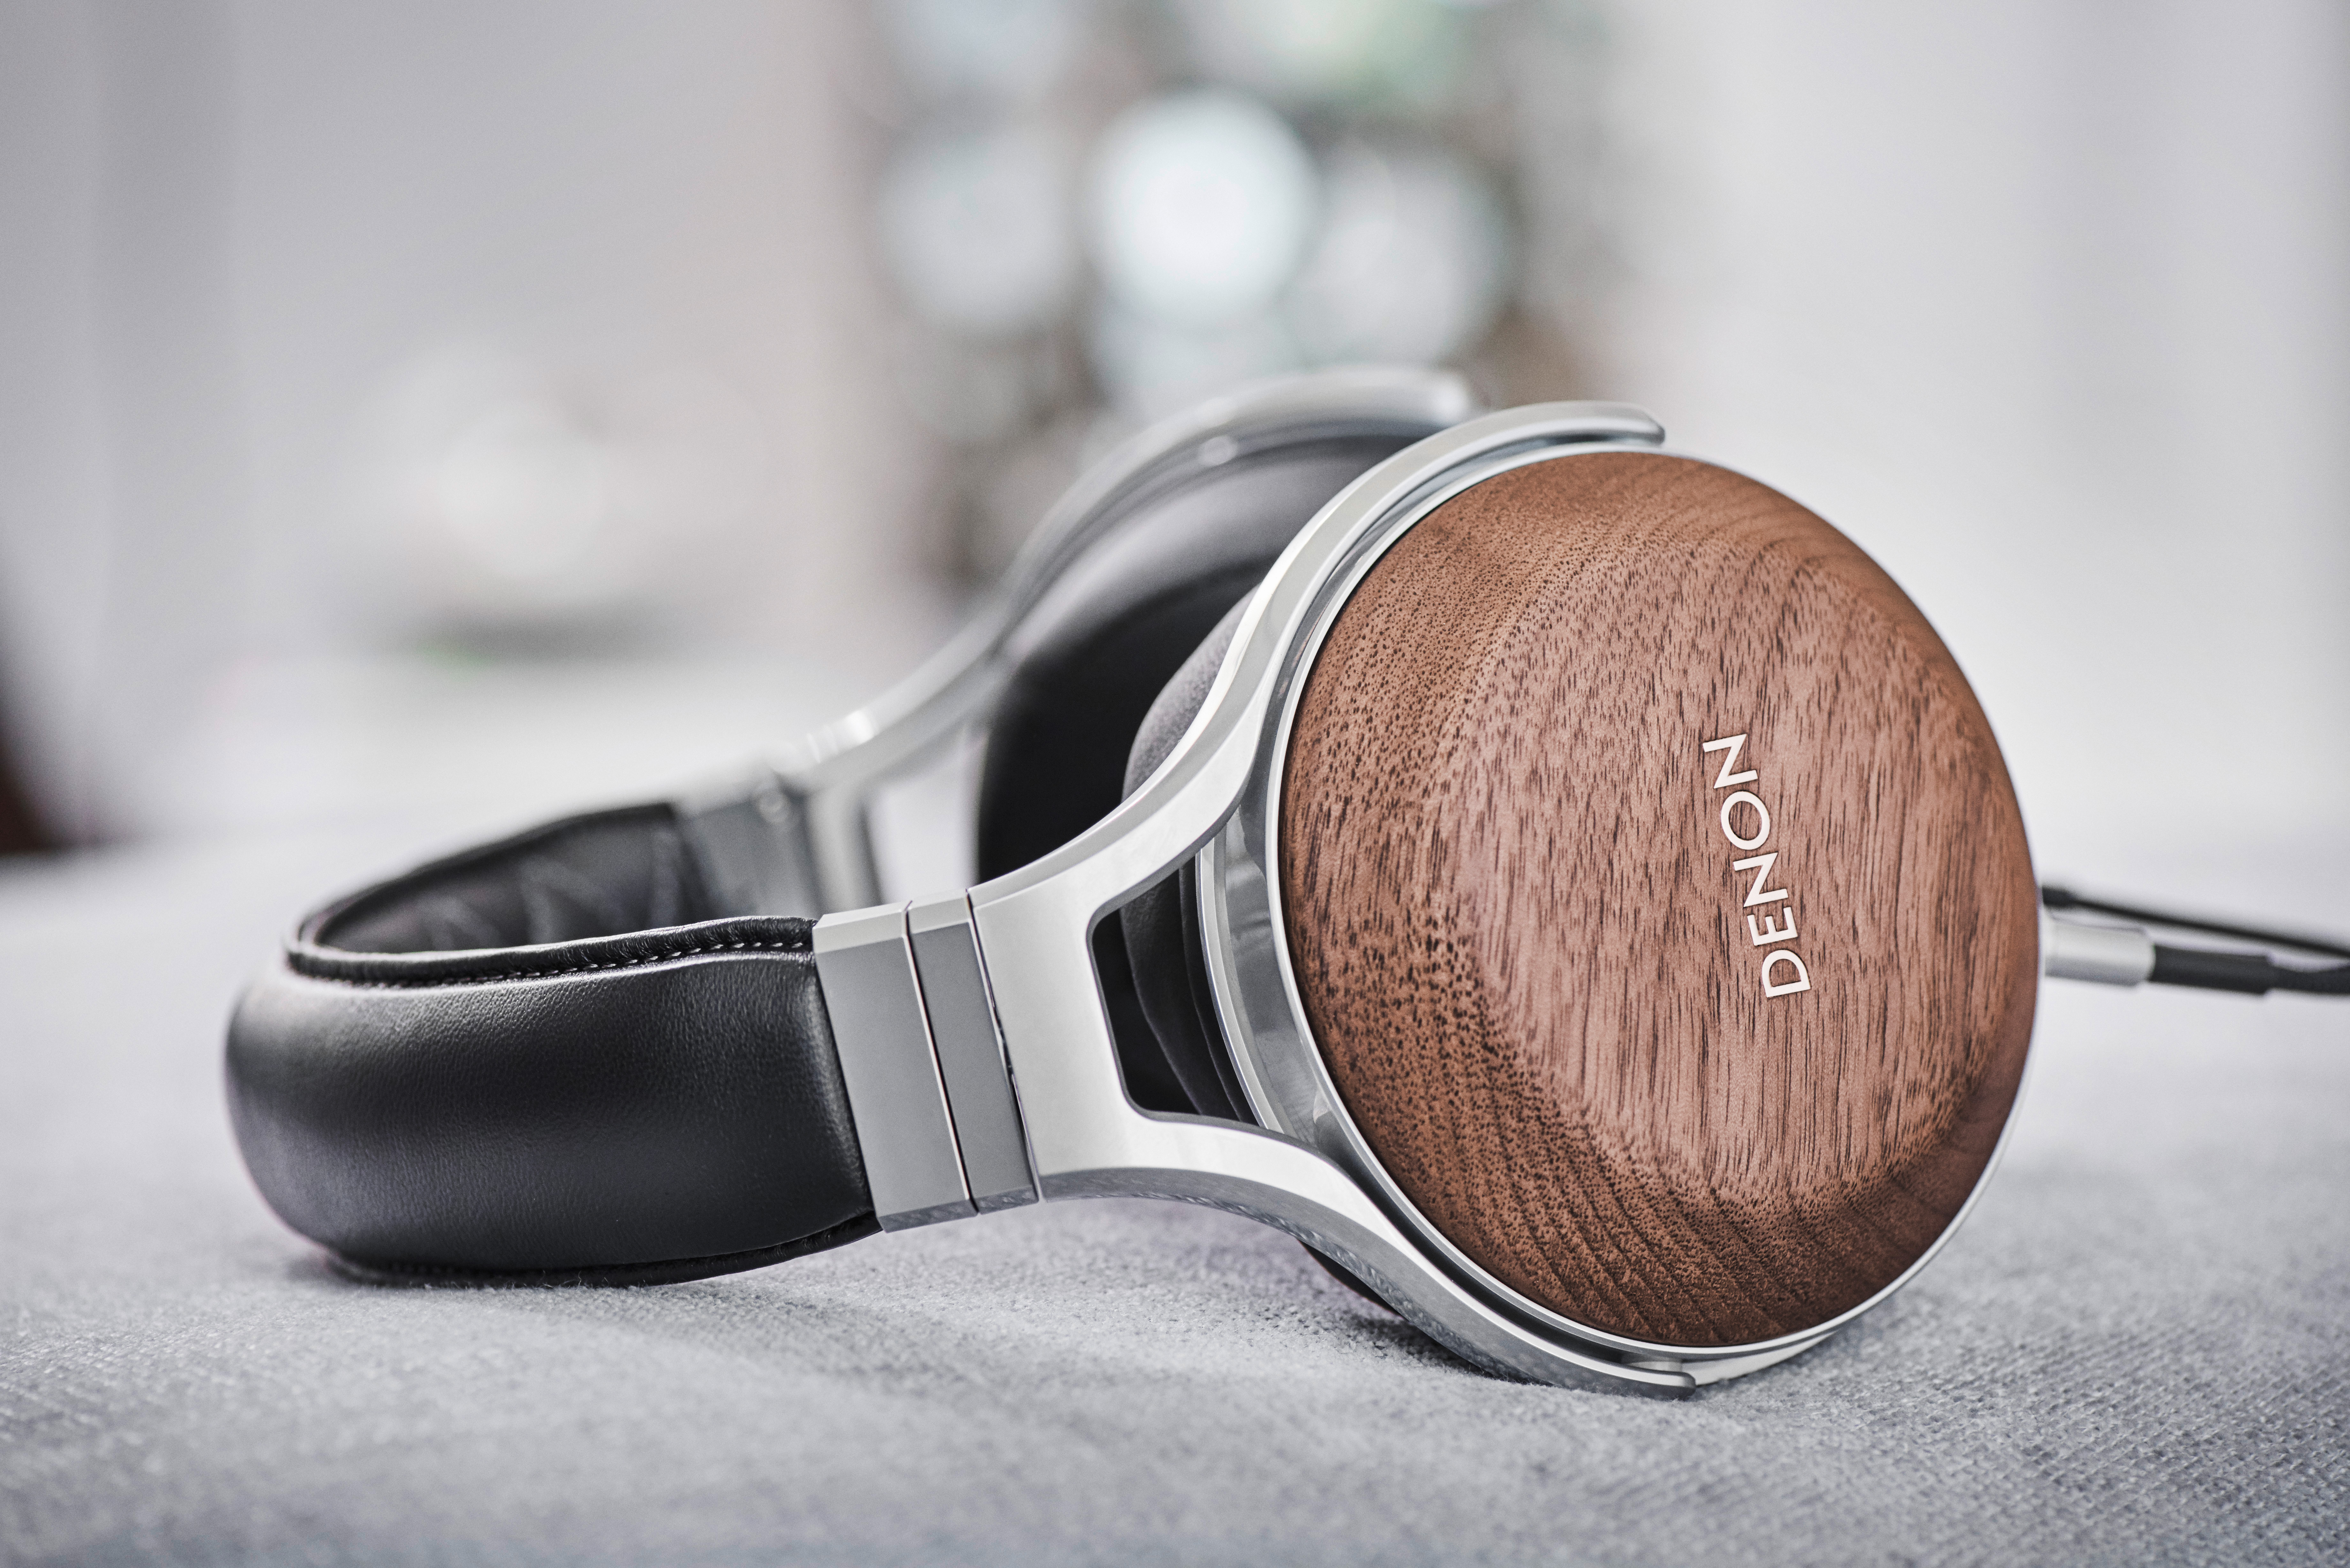 Denon’s new headphones use 50 years of experience for “the most demanding audiophile”